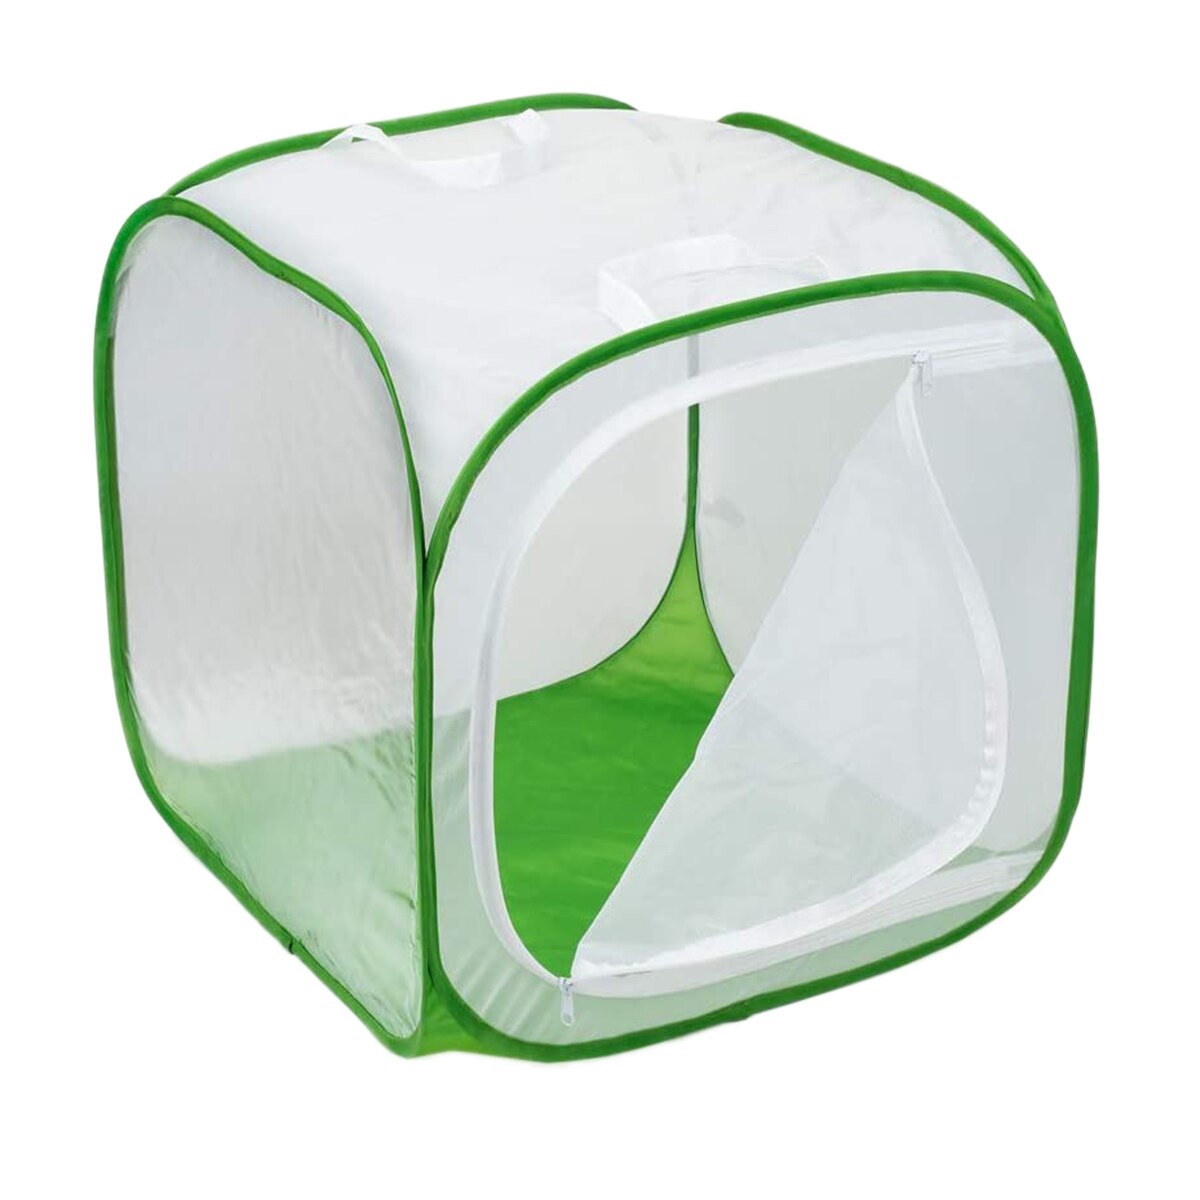 Insect En Vlinder Kooi Insect Observatie Cube Met Rits Terrarium Pop-Up 11.8 Centimeter Lang Grote Opvouwbare Insect Netto kooi